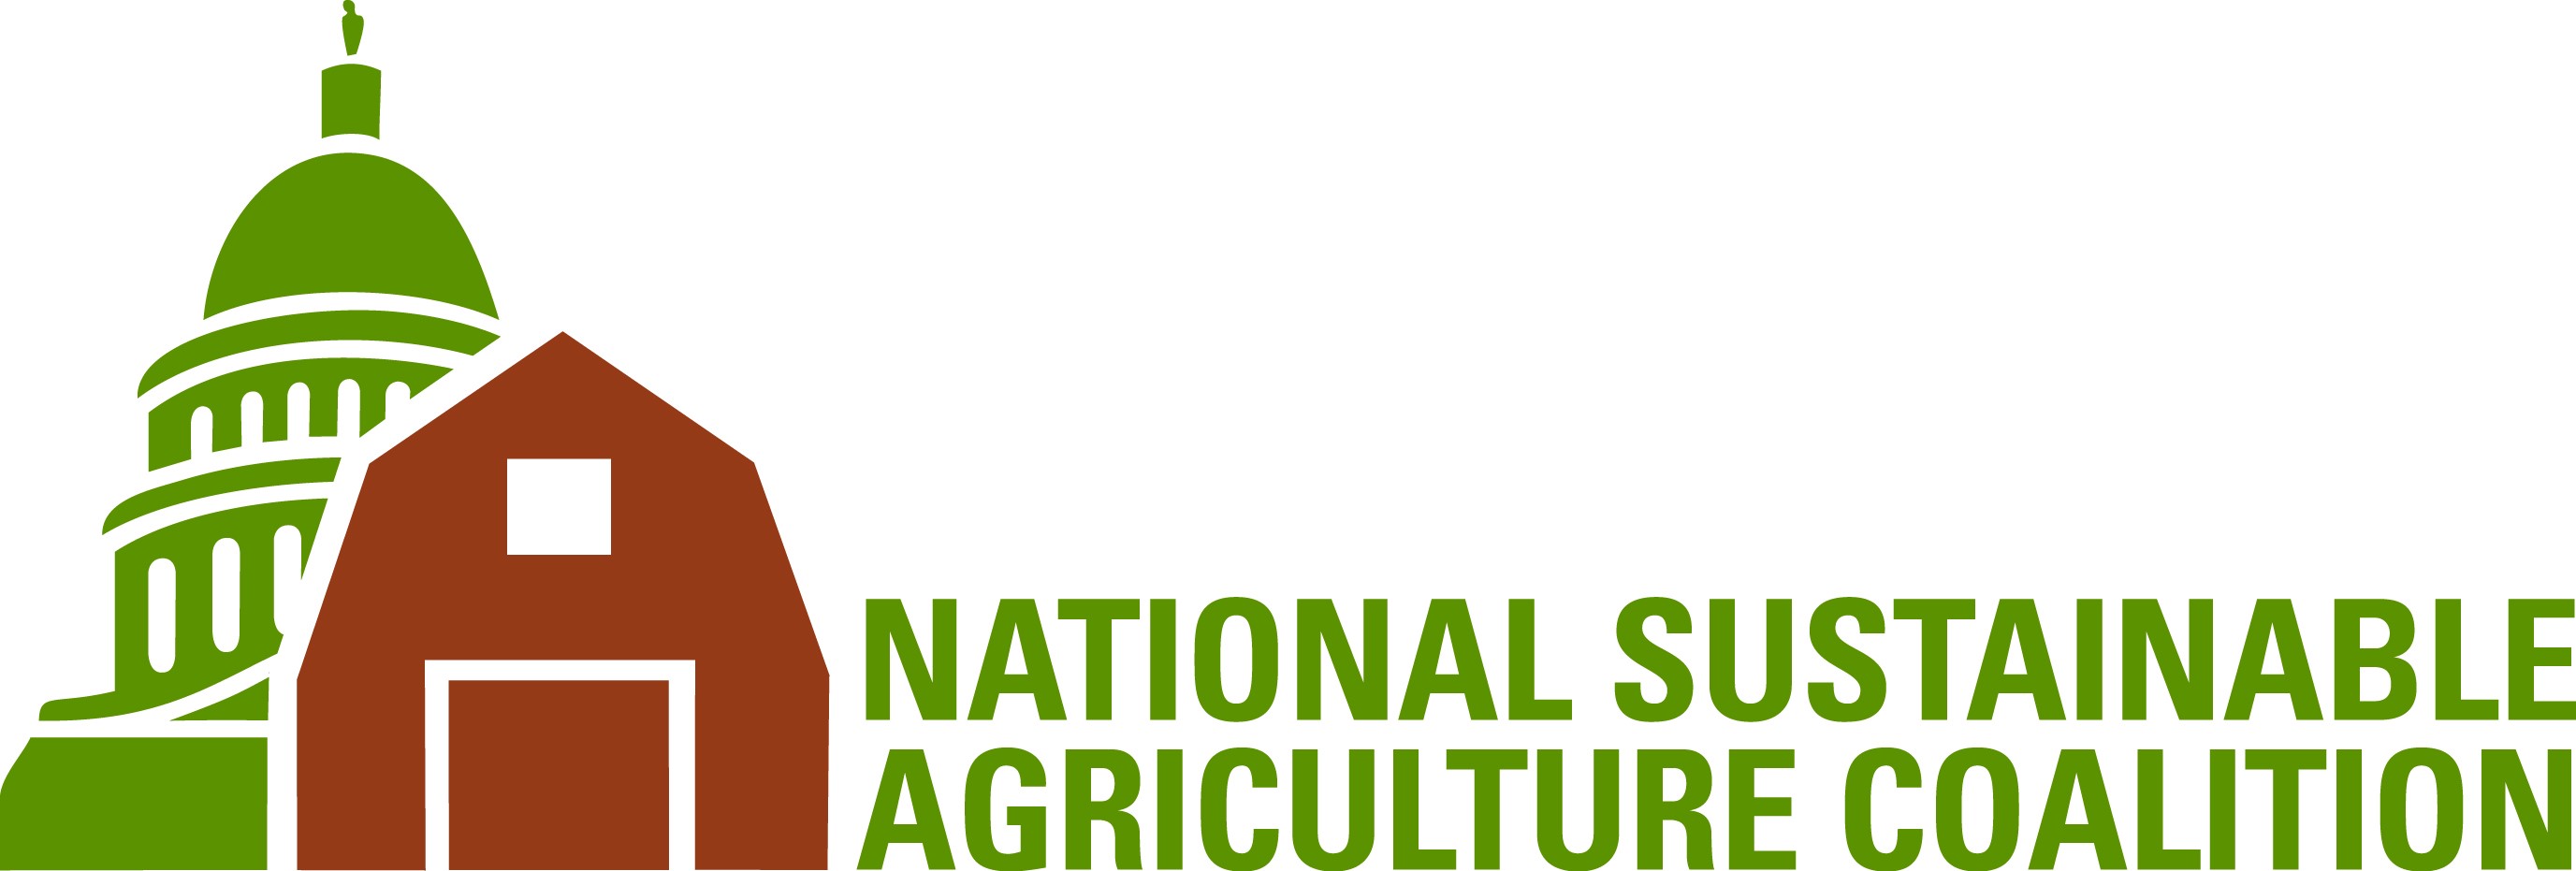 NSAC Joins With More Than 750 Organizations Calling on USDA to Provide Direct Aid to Farmers Who Rely on Local and Regional Markets